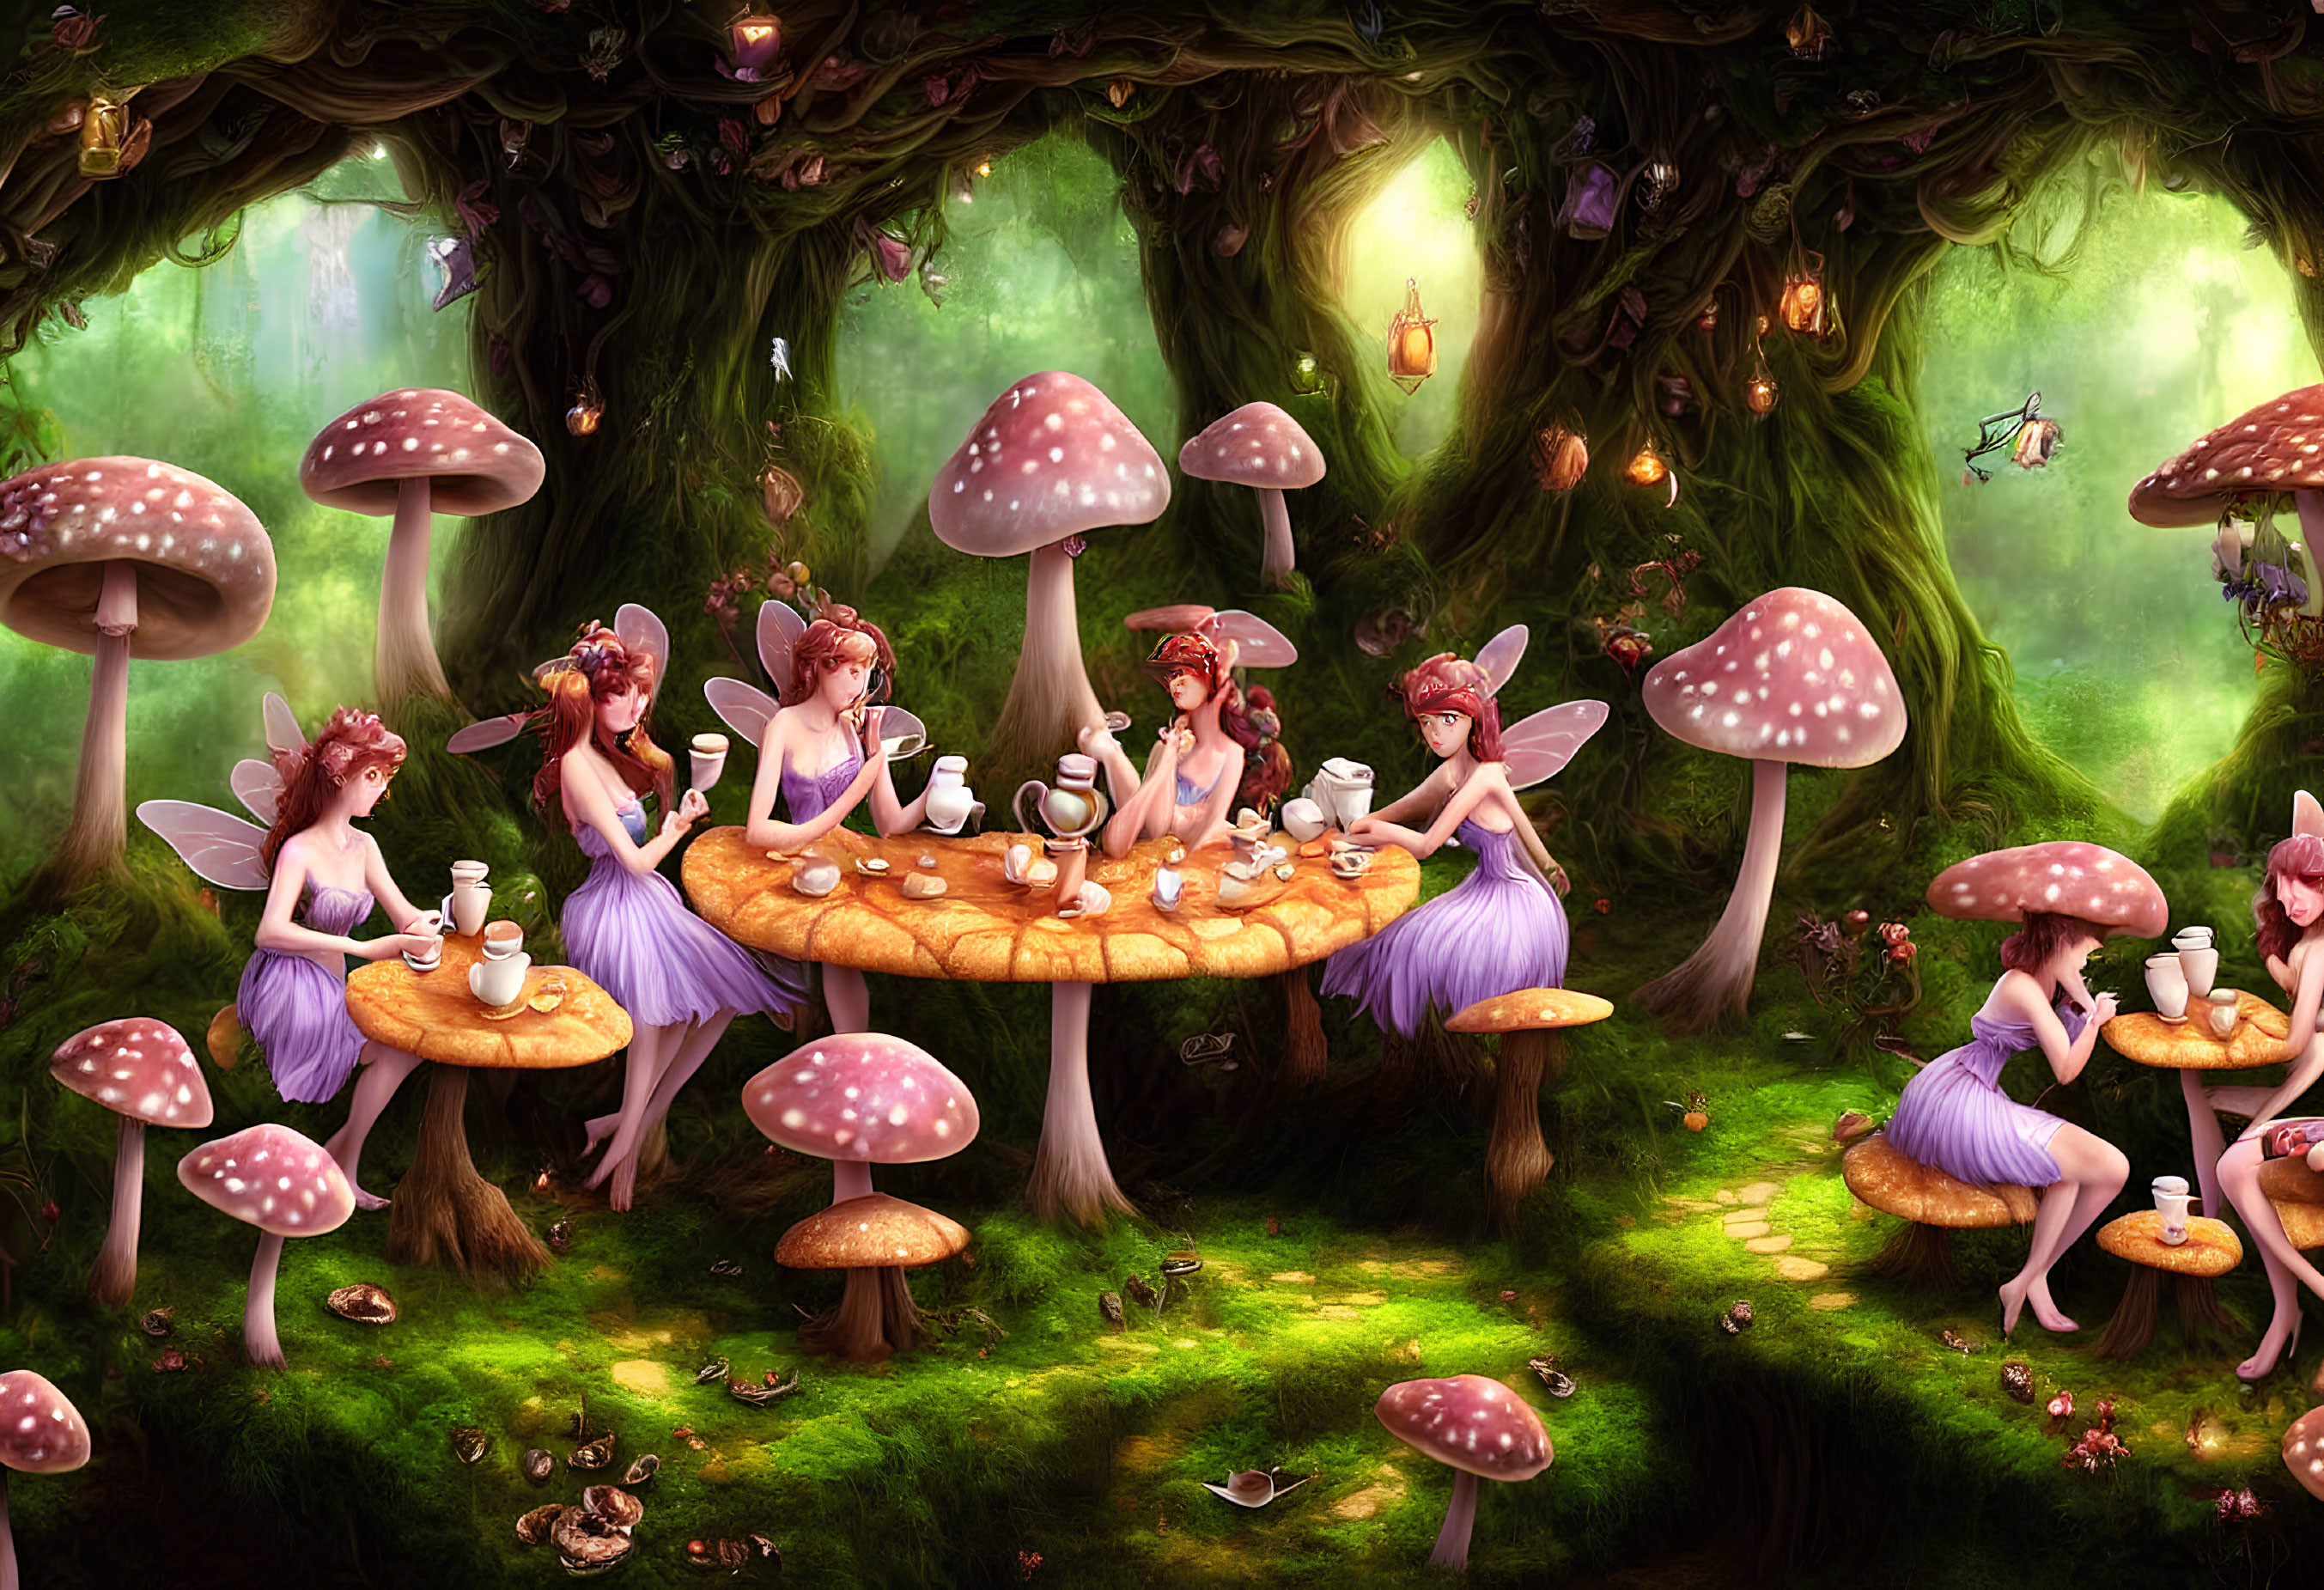 Enchanted forest fairies at mushroom table in vibrant scene